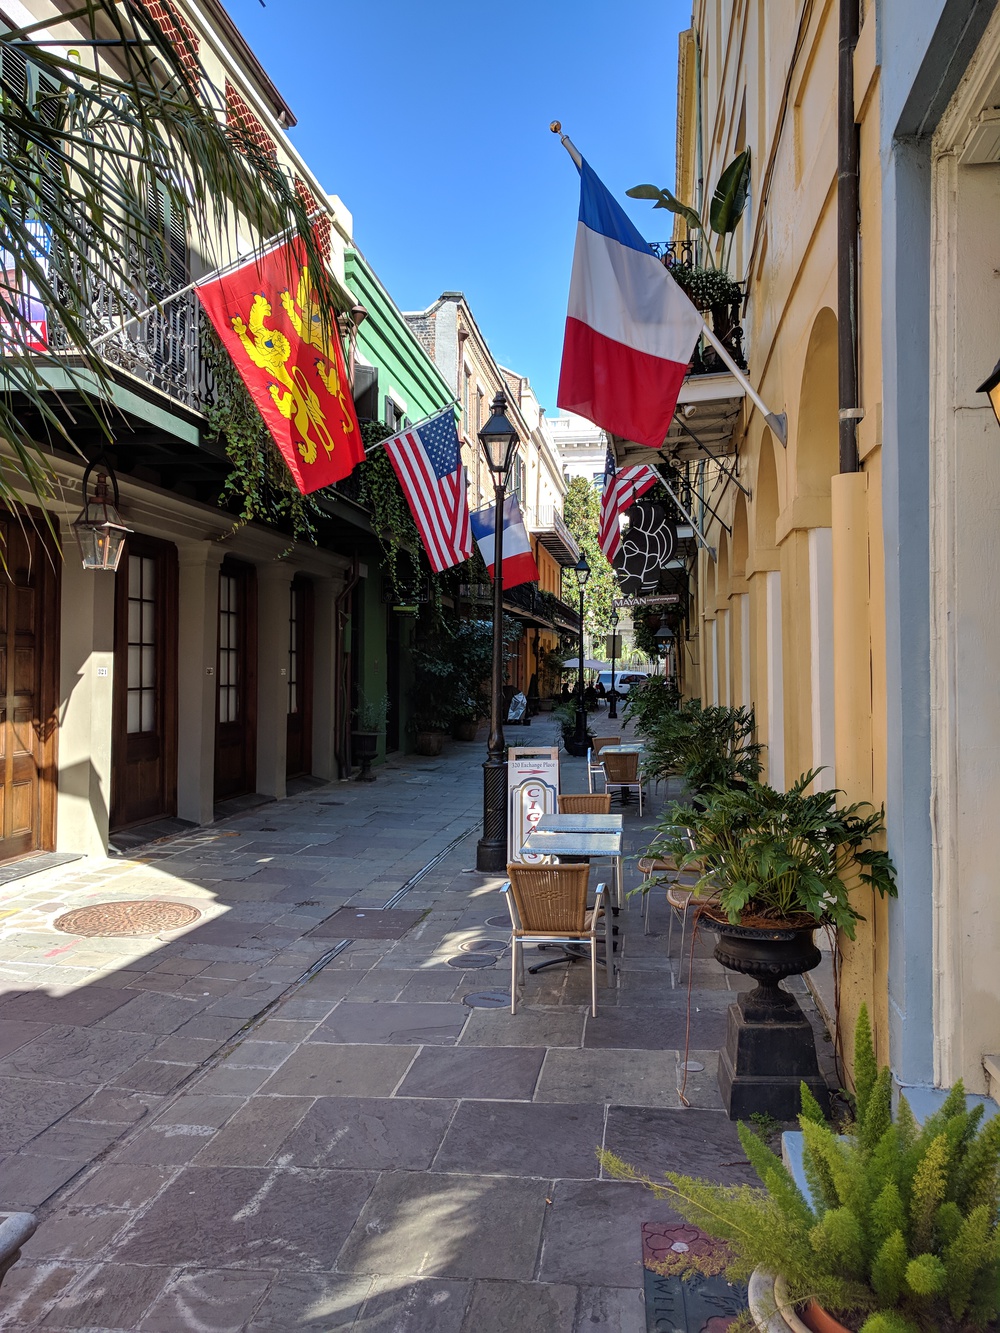 nola_alley_flags-resized